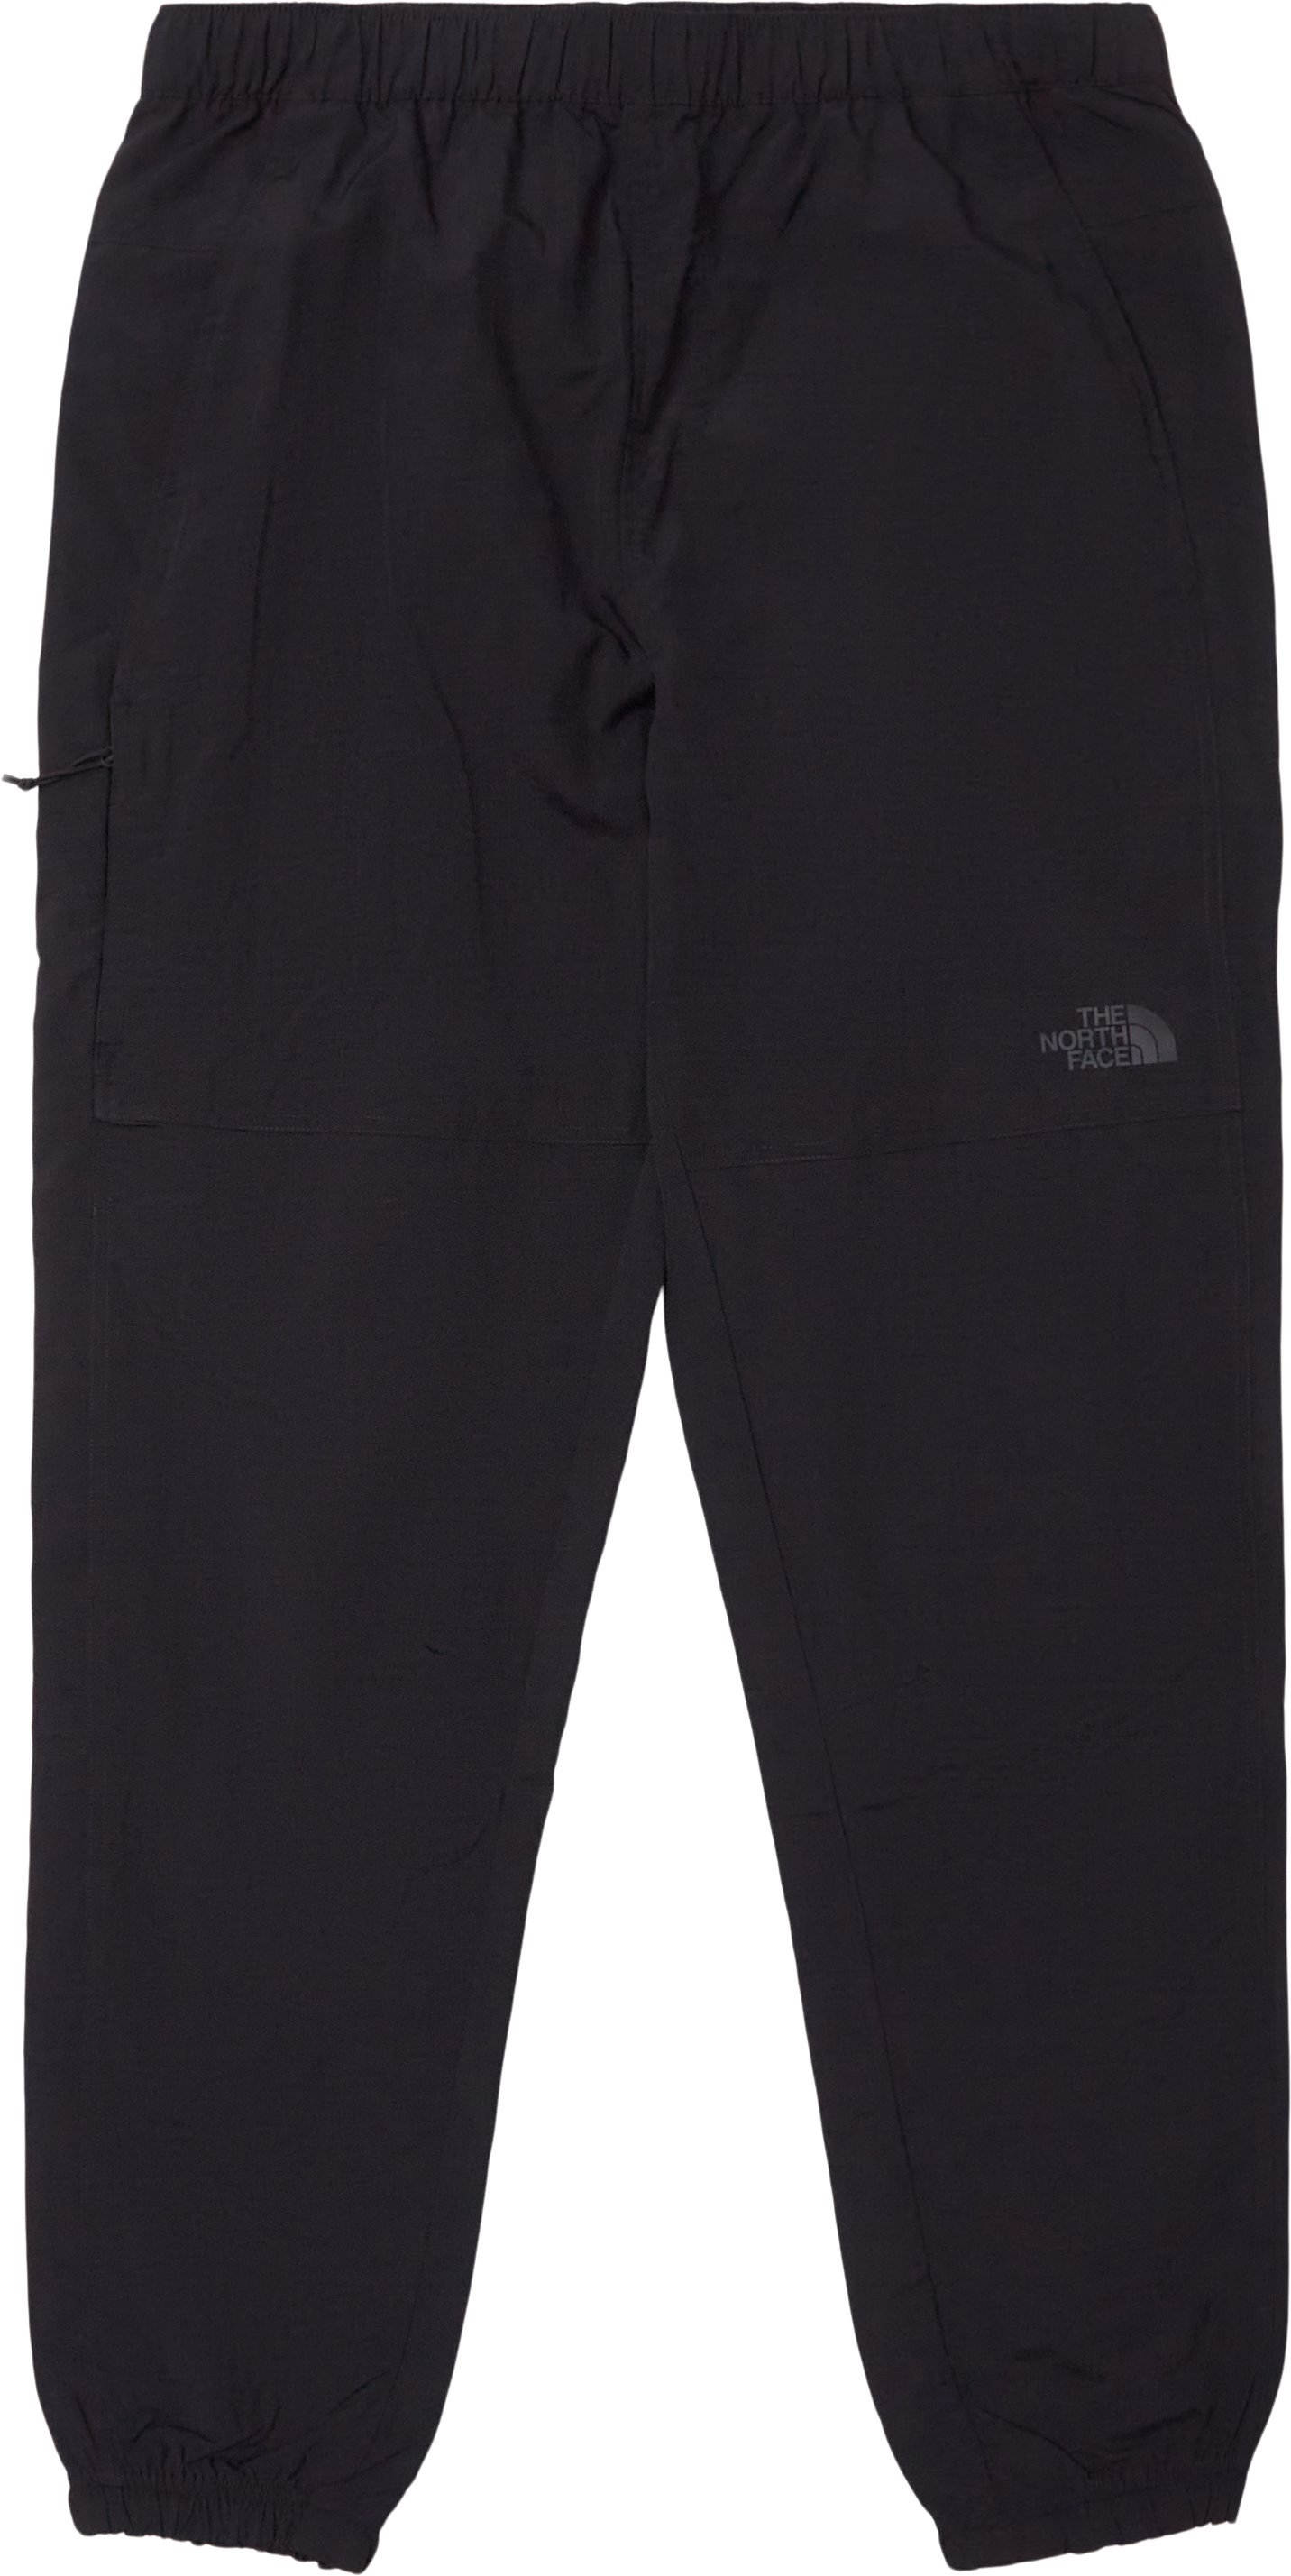 The North Face Bukser WOVEN PANT SS22 Sort